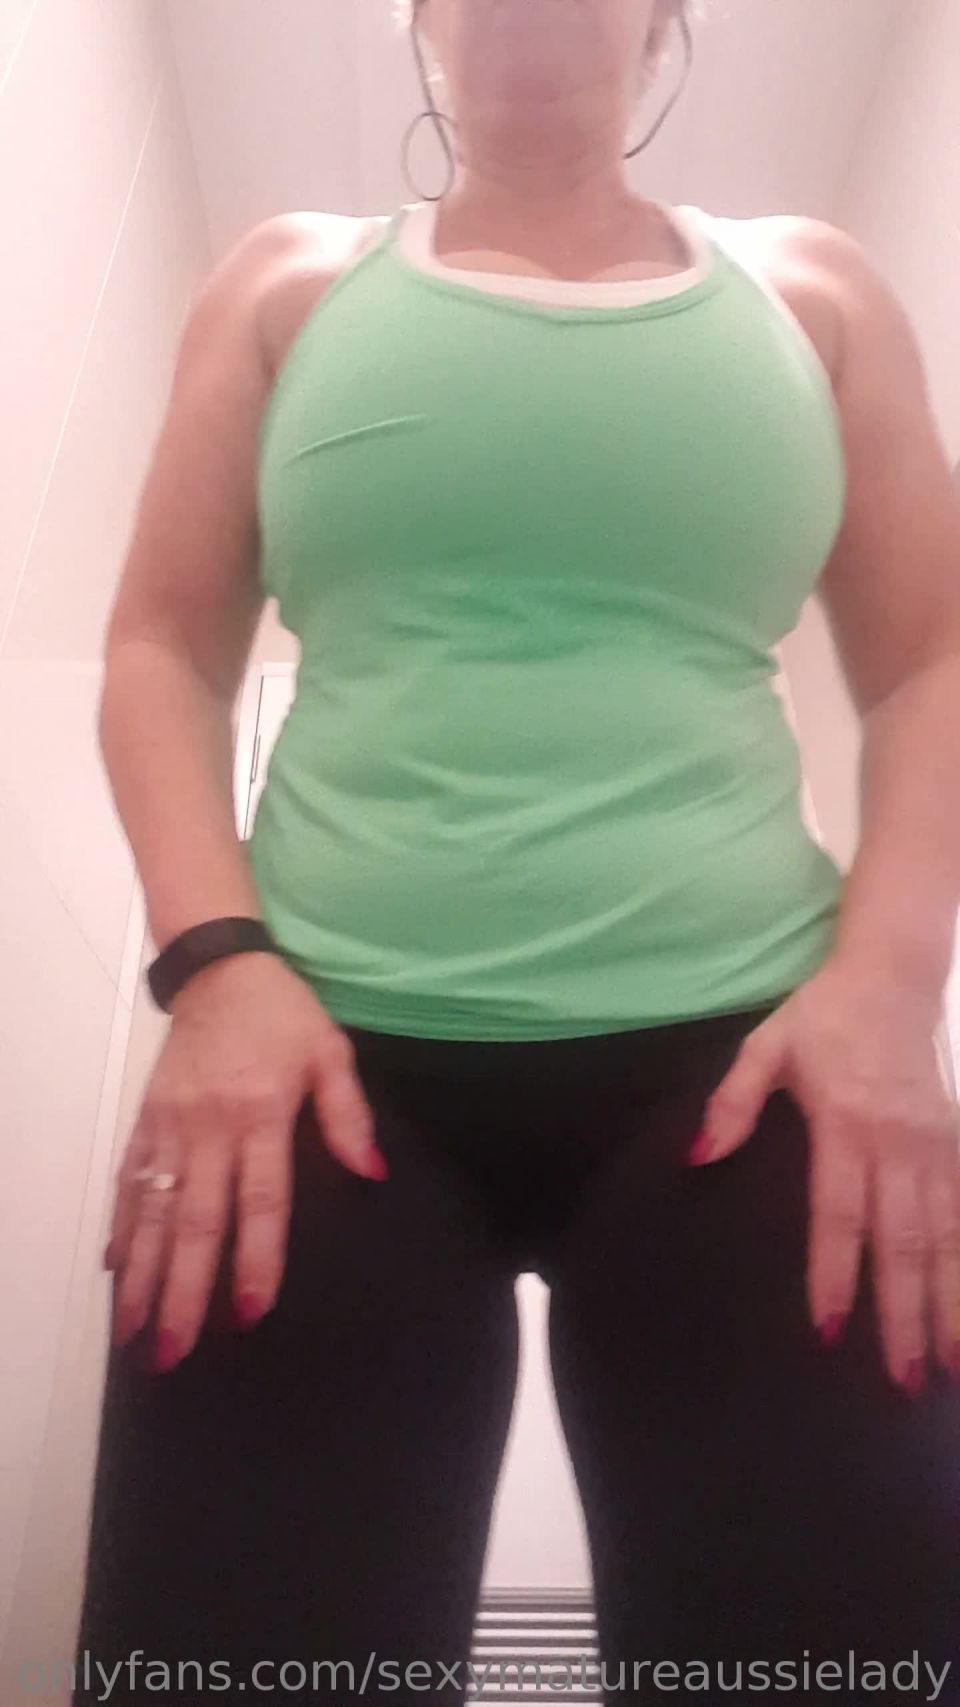 sexymatureaussielady  Wicked wednesday titty reveal at the gym 04-06-2019